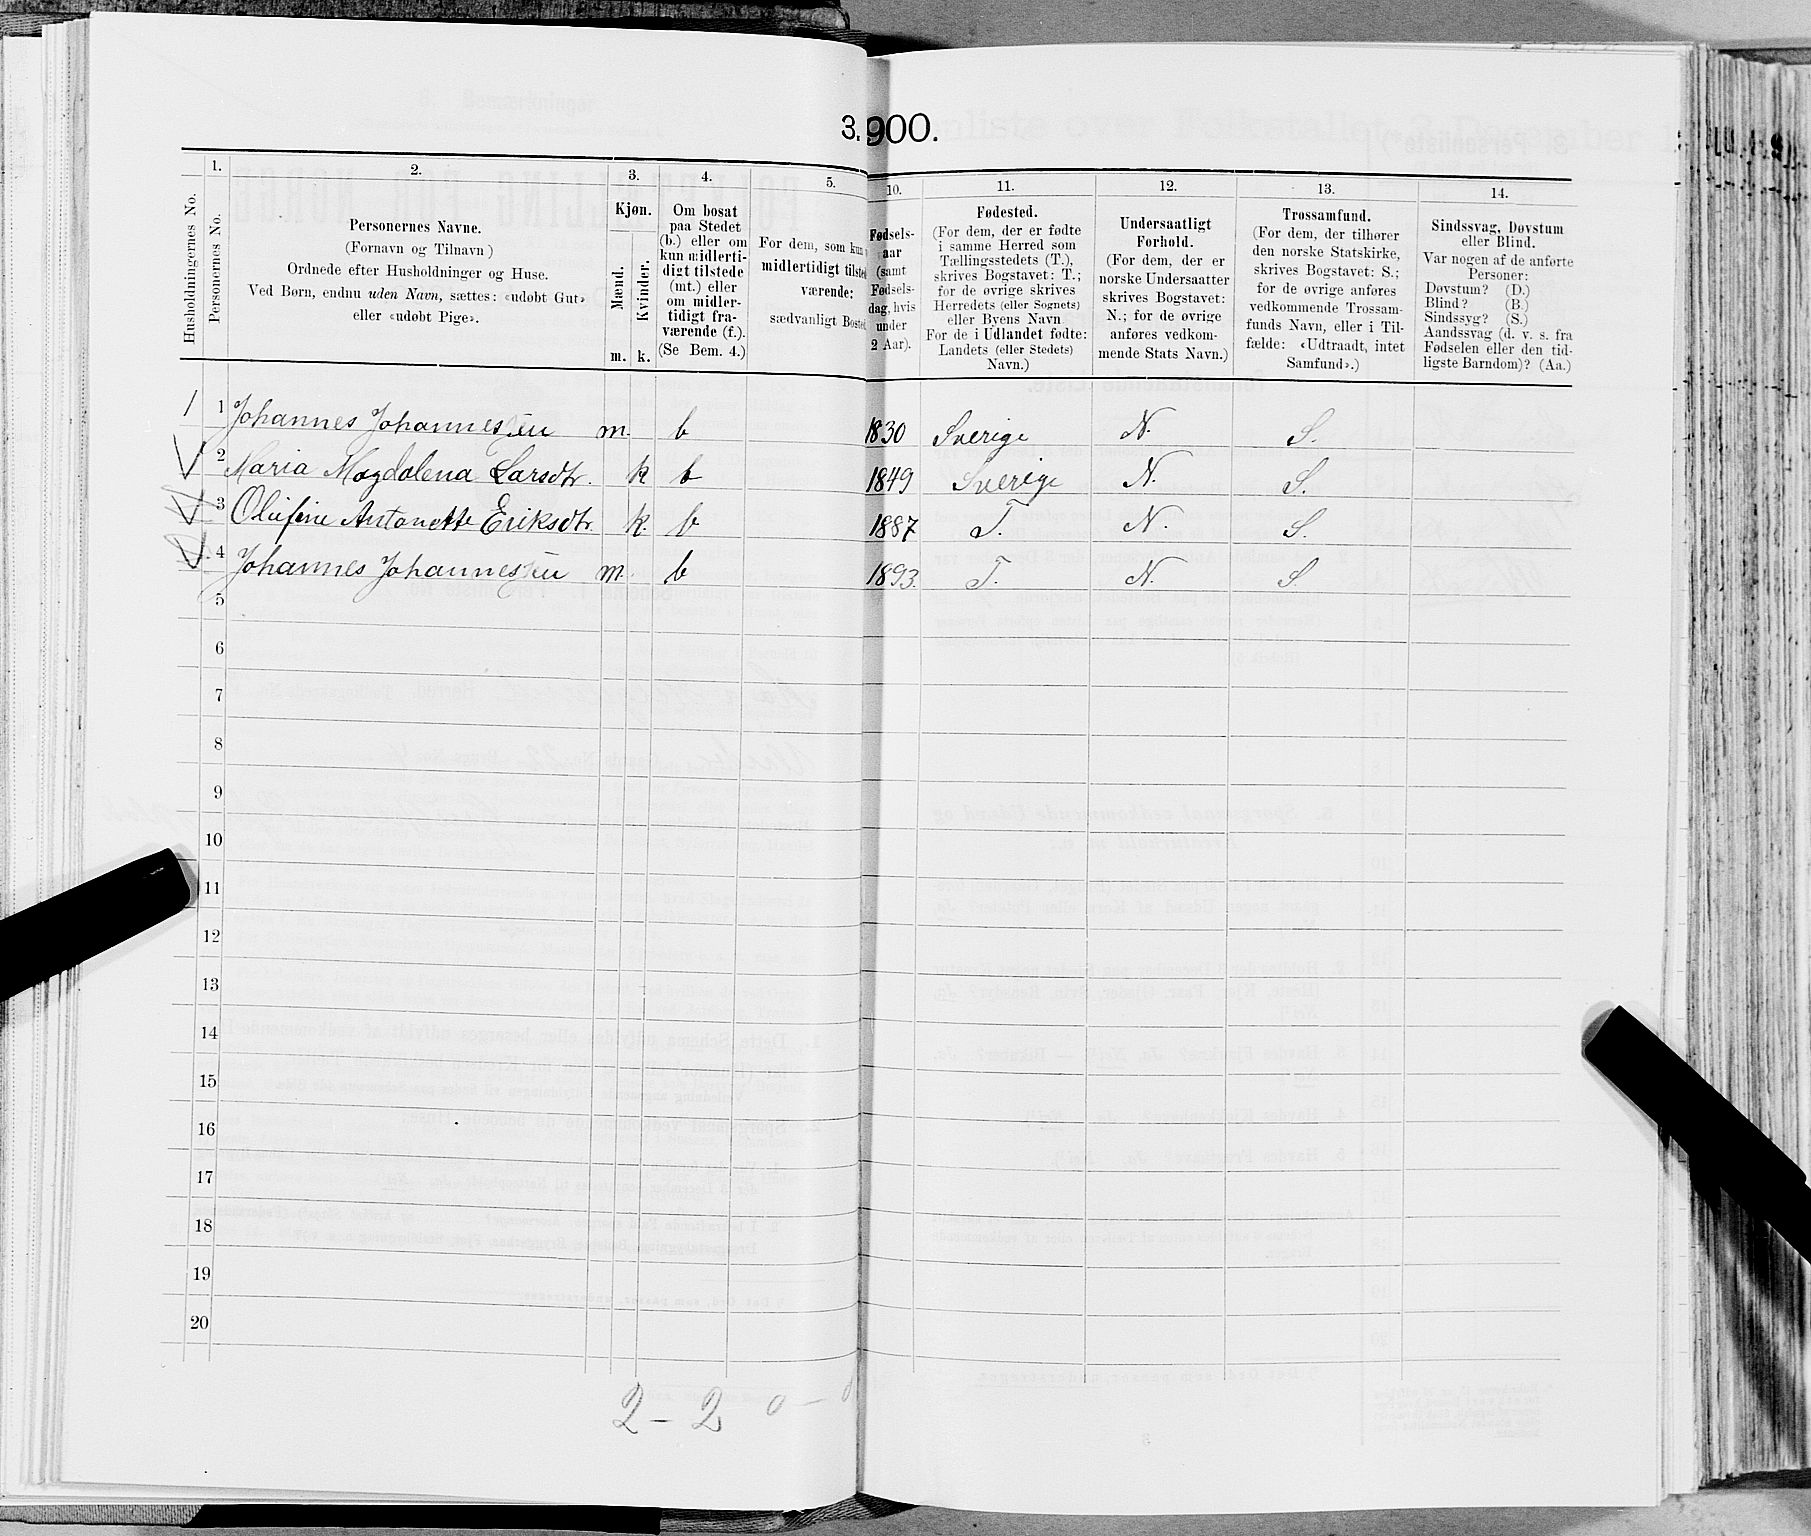 SAT, 1900 census for Mo, 1900, p. 433